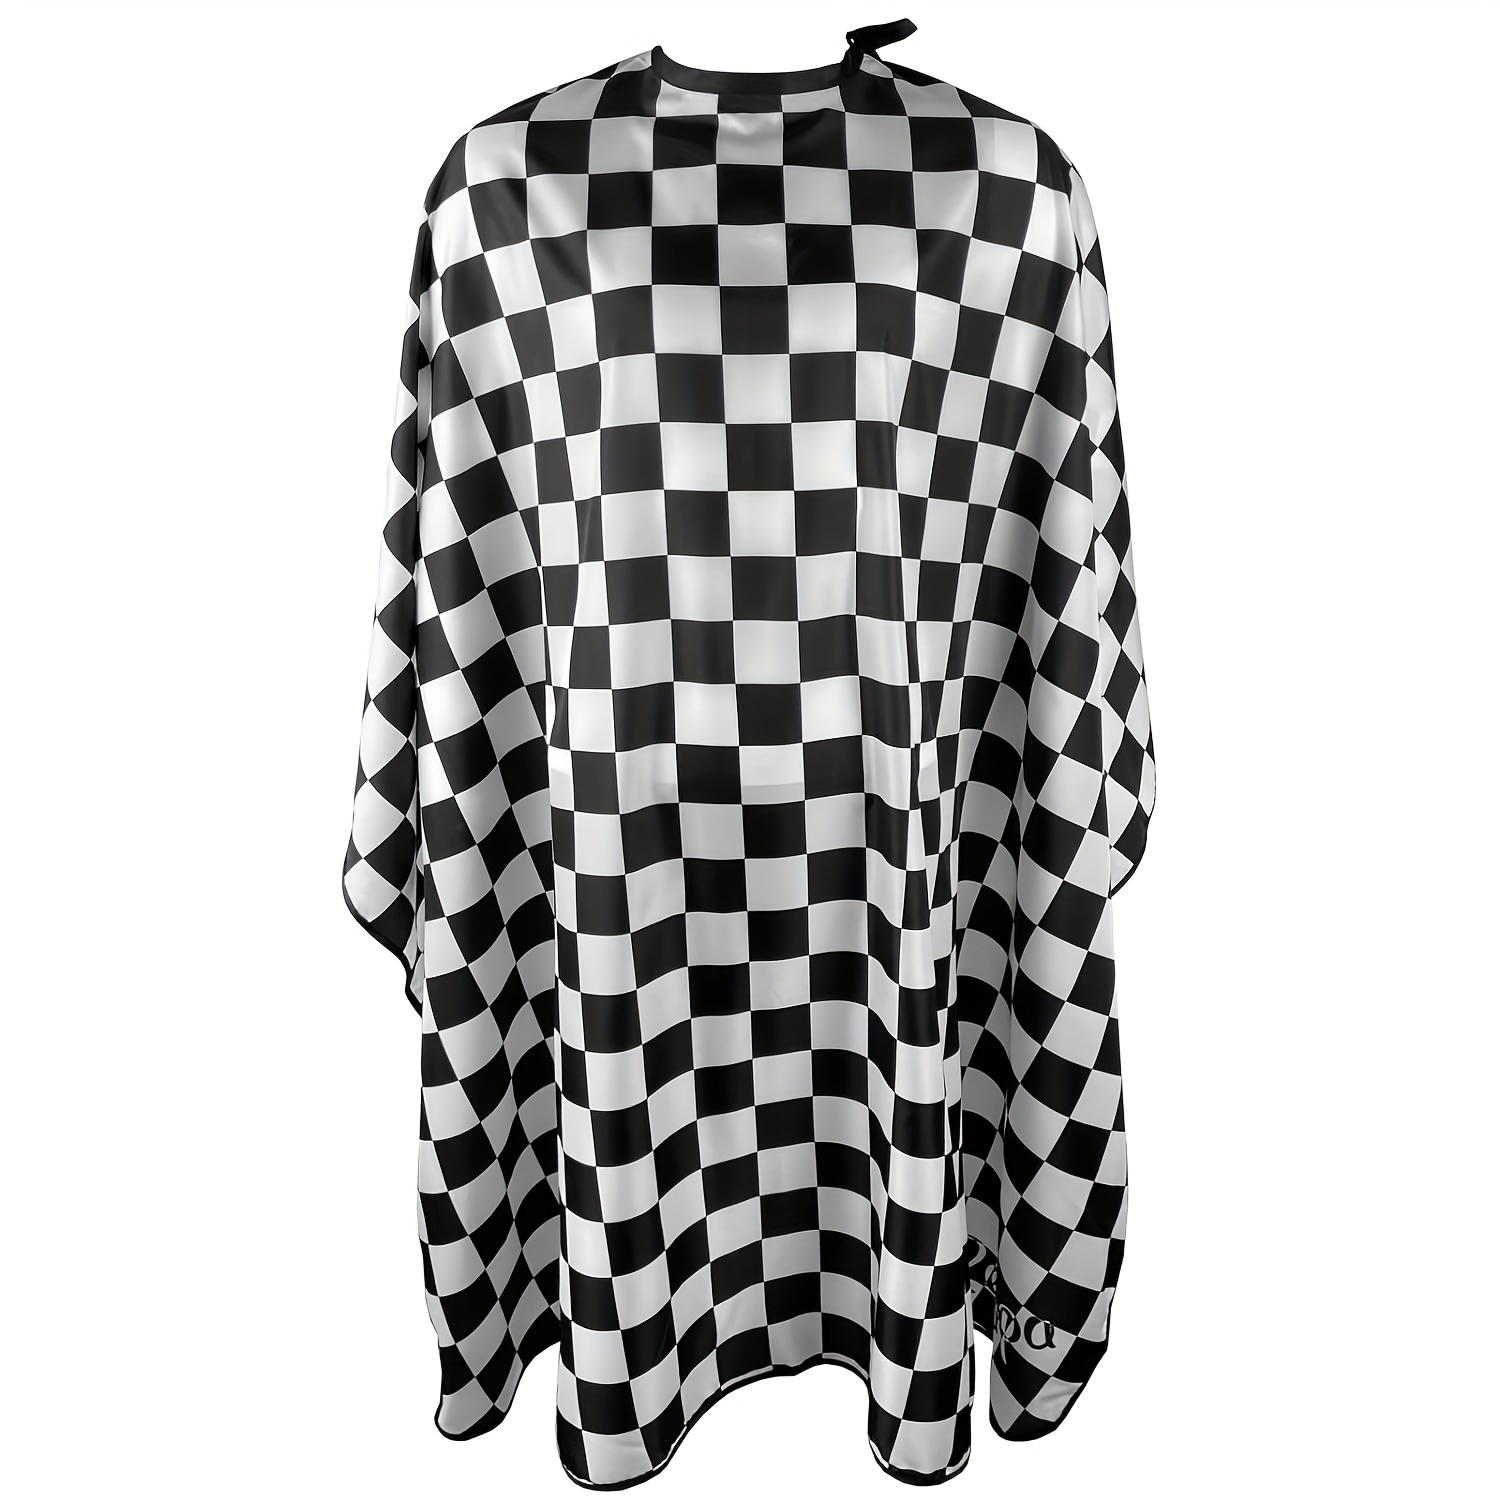 

Checked Pattern Barber Cape For Men, Haircut Cape With Snap Closure, Professional Salon Cutting Cape, Large Waterproof Hairdressing Cape Gown Apron For Hairstylist